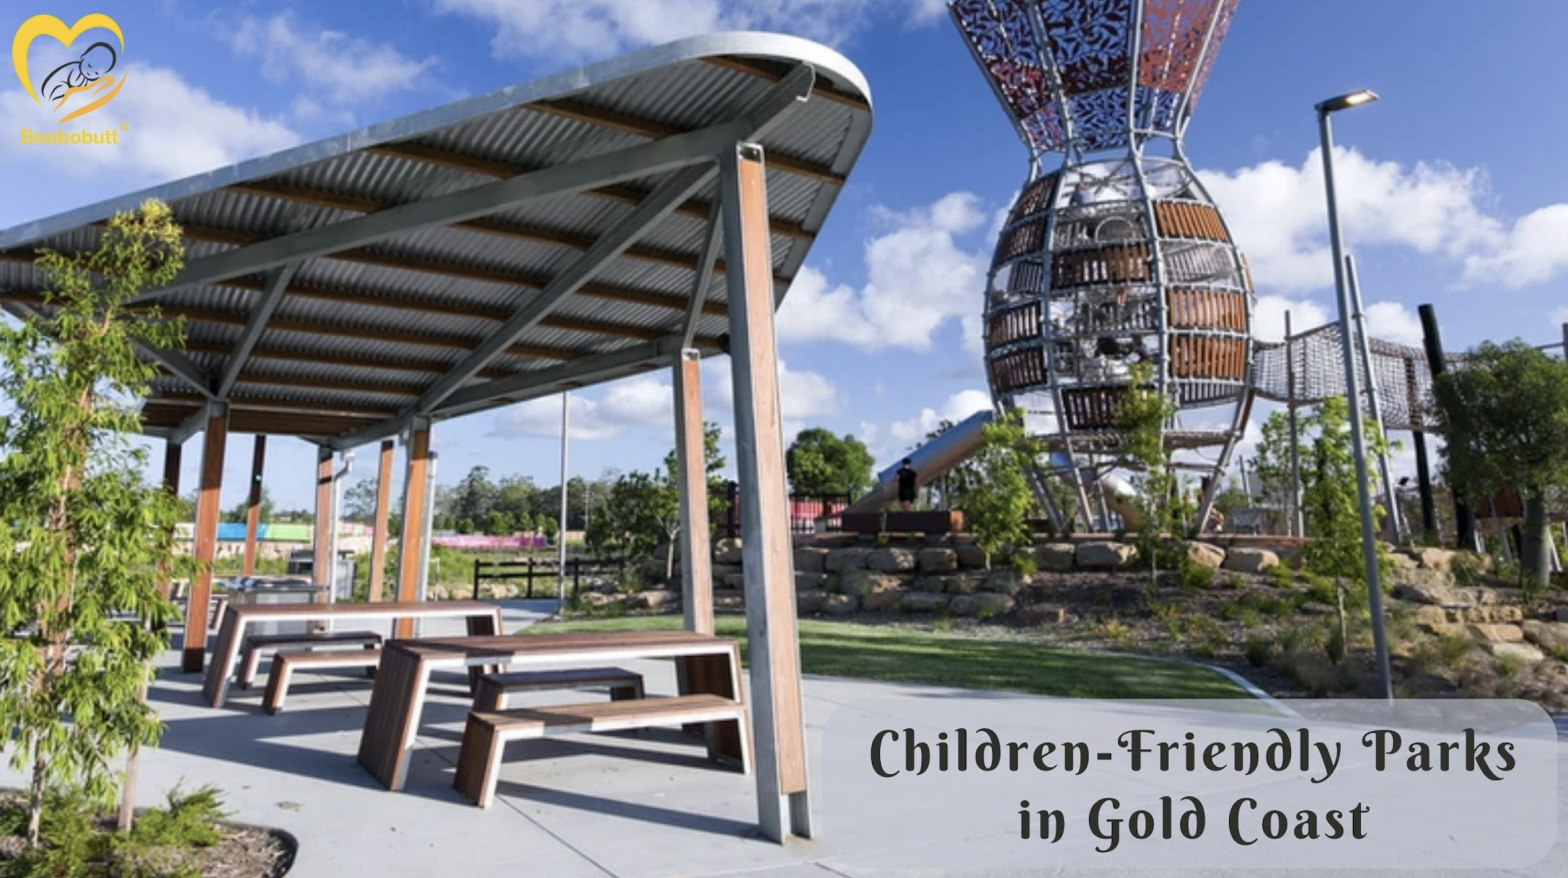 Child Friendly Parks on the Gold Coast